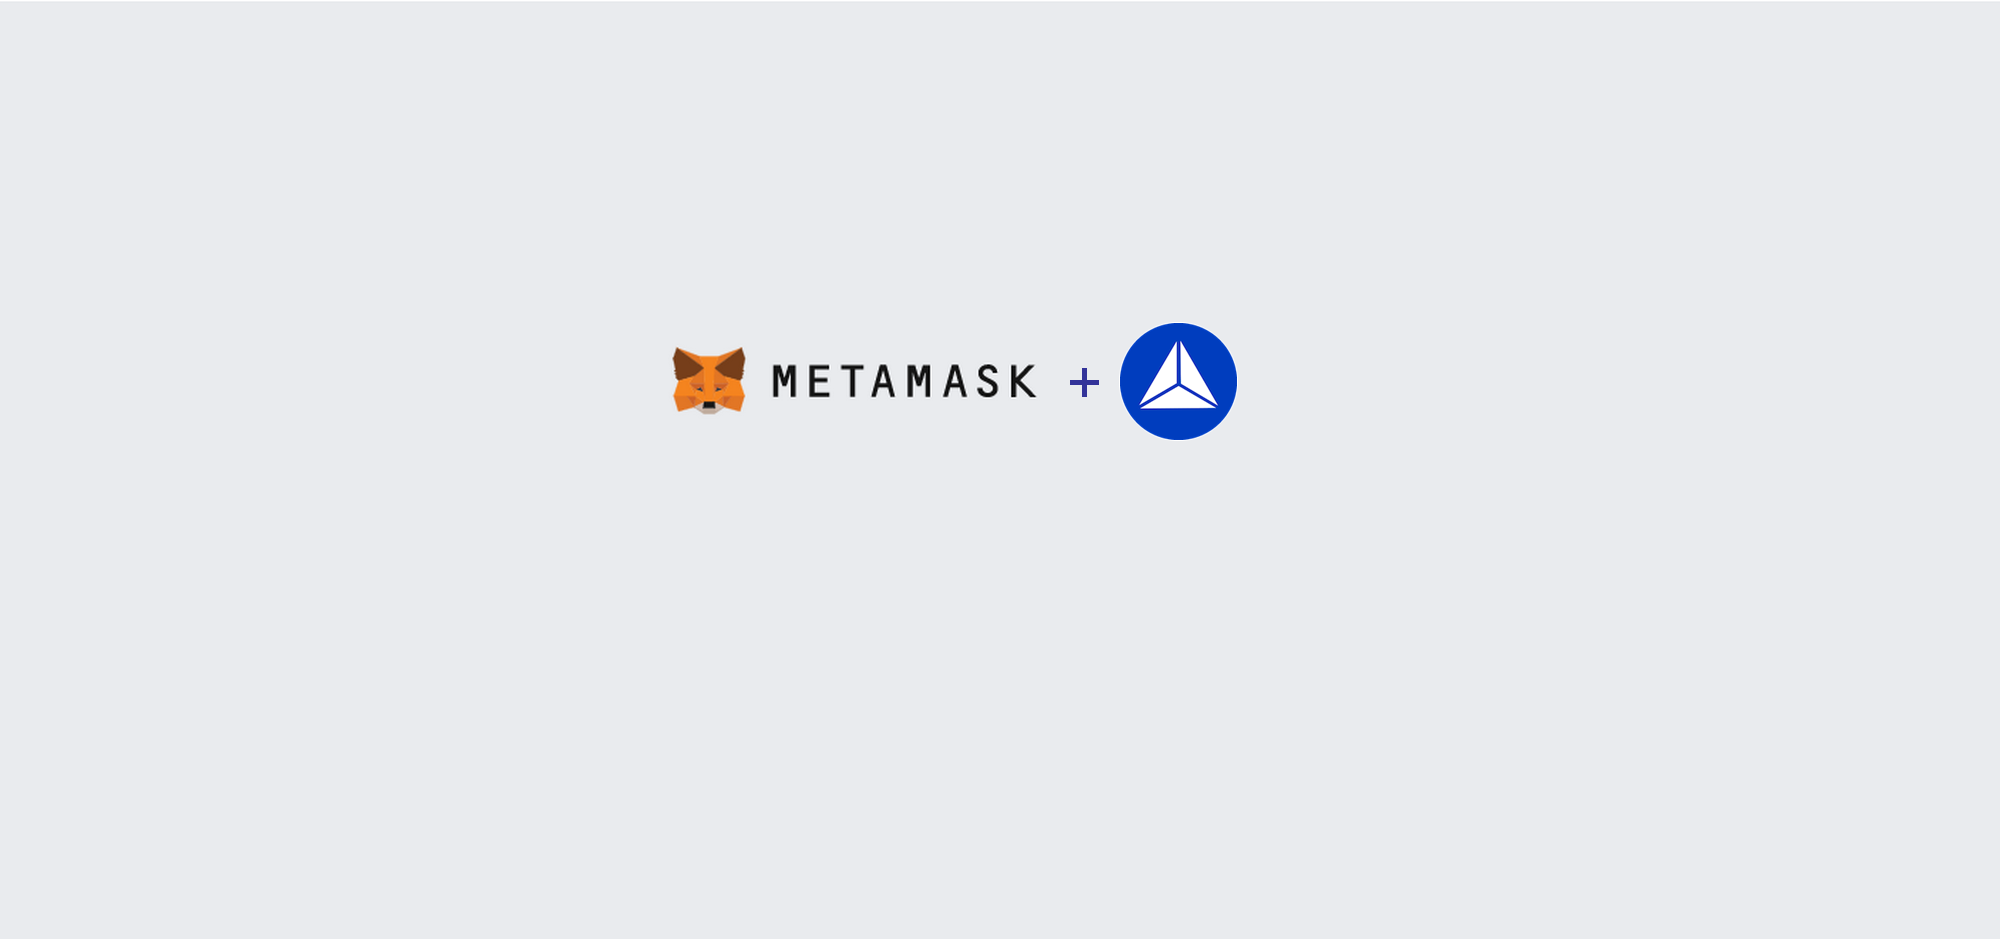 How do I preview my AIV tokens in MetaMask wallet?